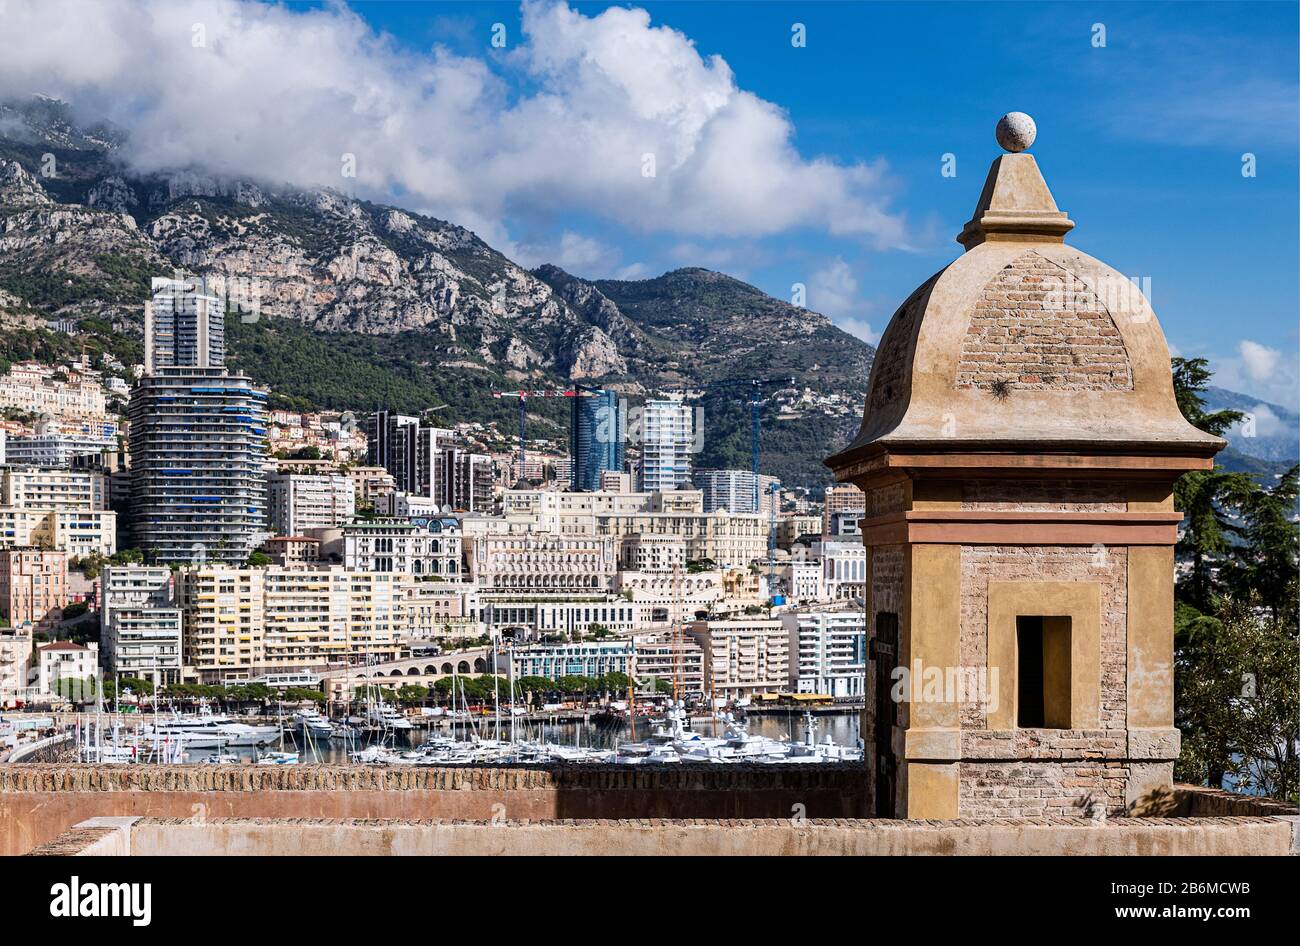 Rampart of the royal palace overlooking Port Hercule. Stock Photo